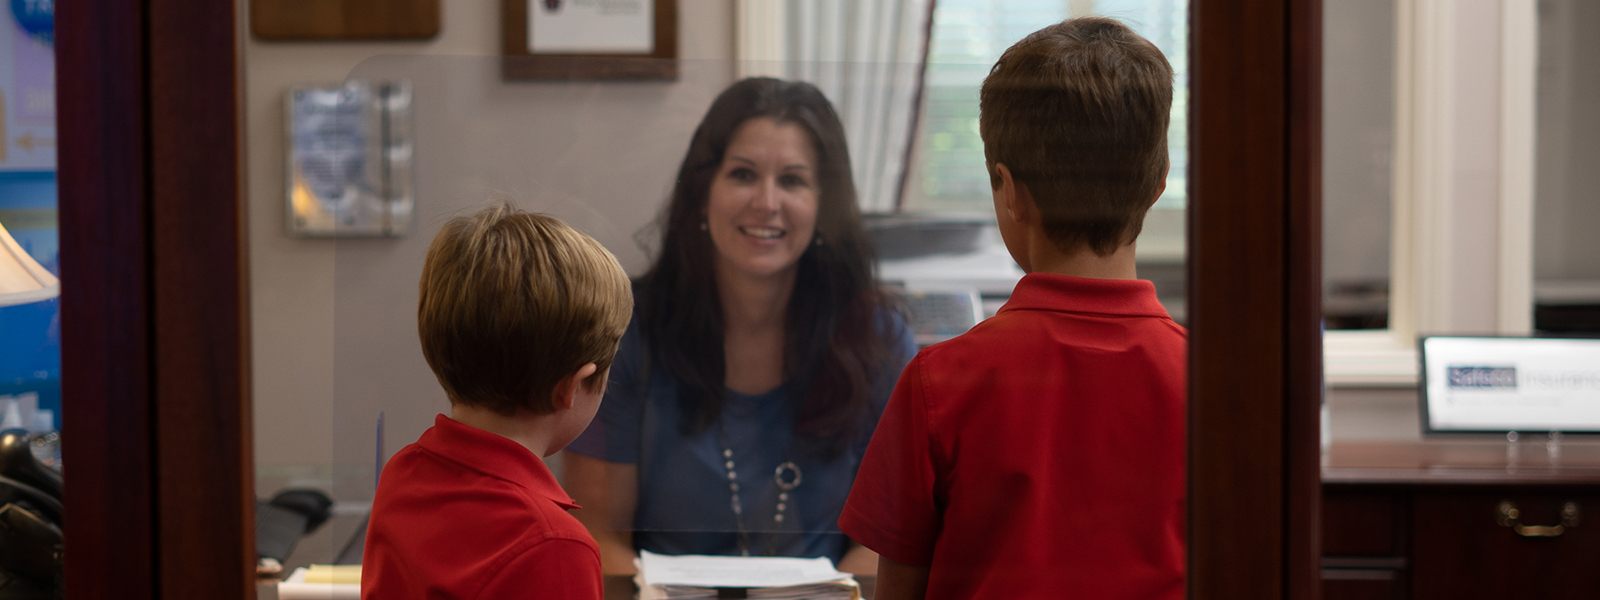 Two boys in red shirts stand in front of a woman's desk.